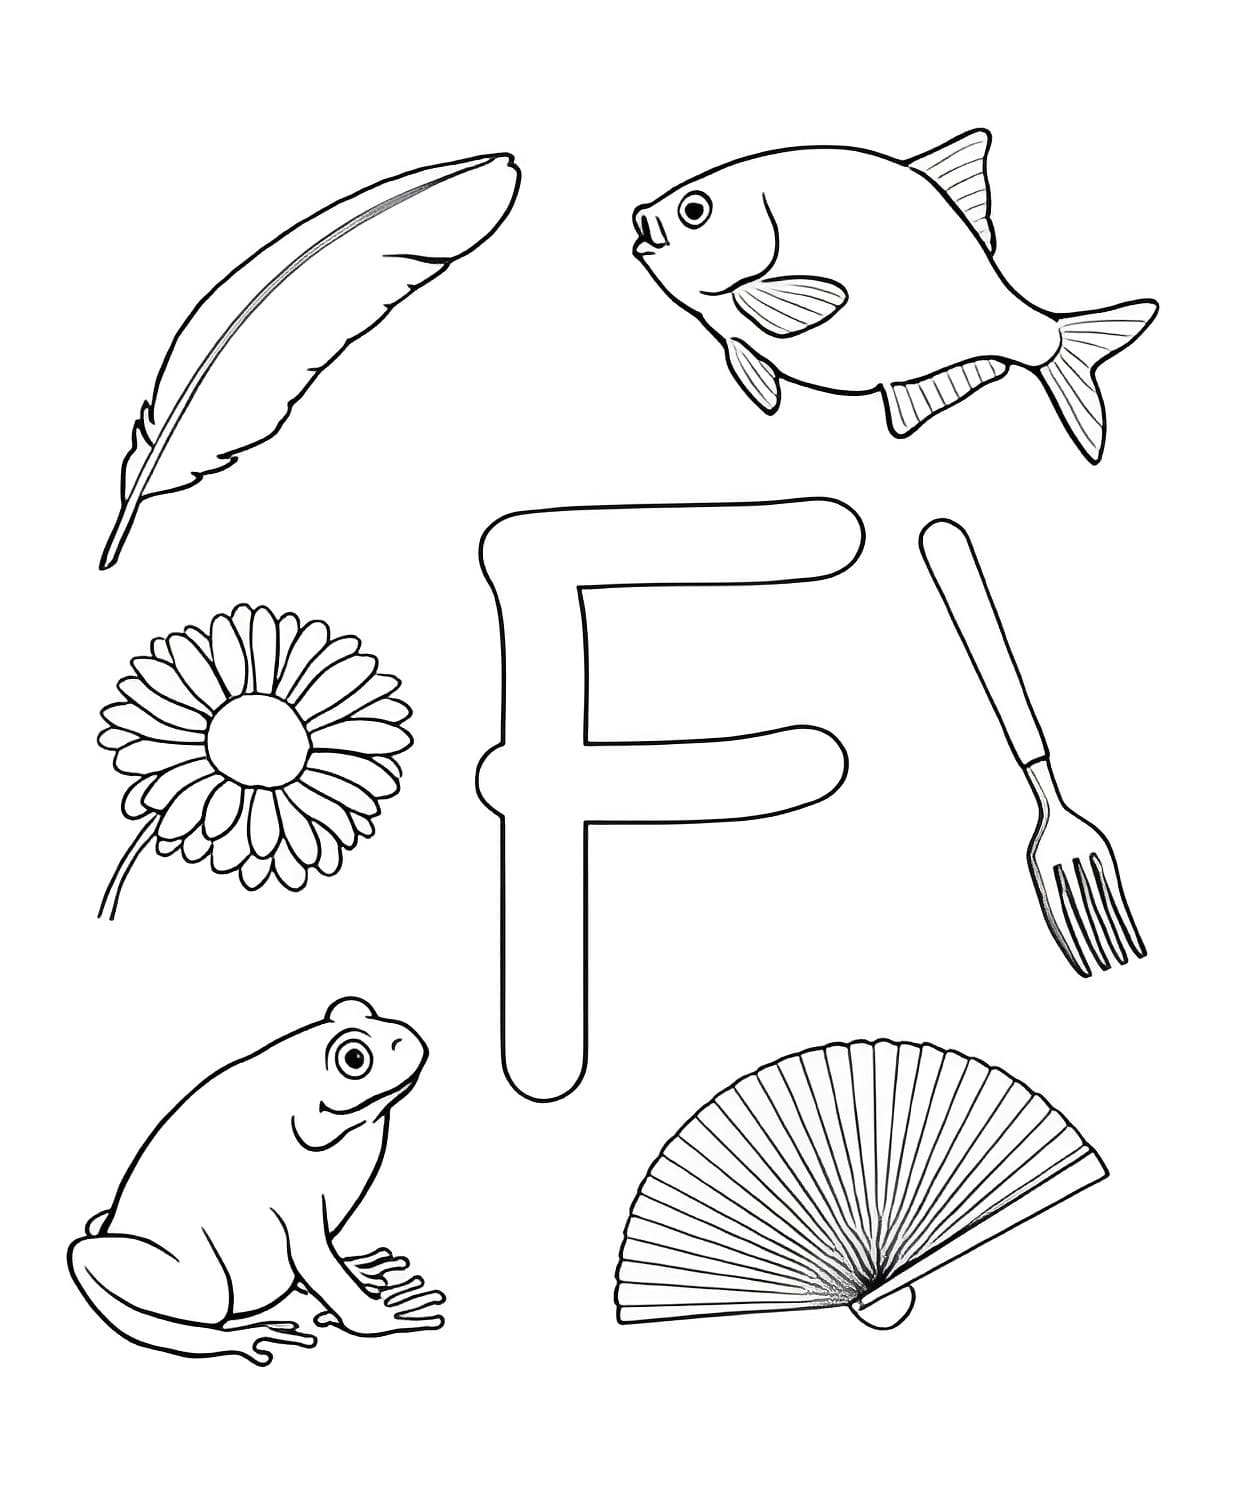 Letter F Printable coloring page - Download, Print or Color Online for Free